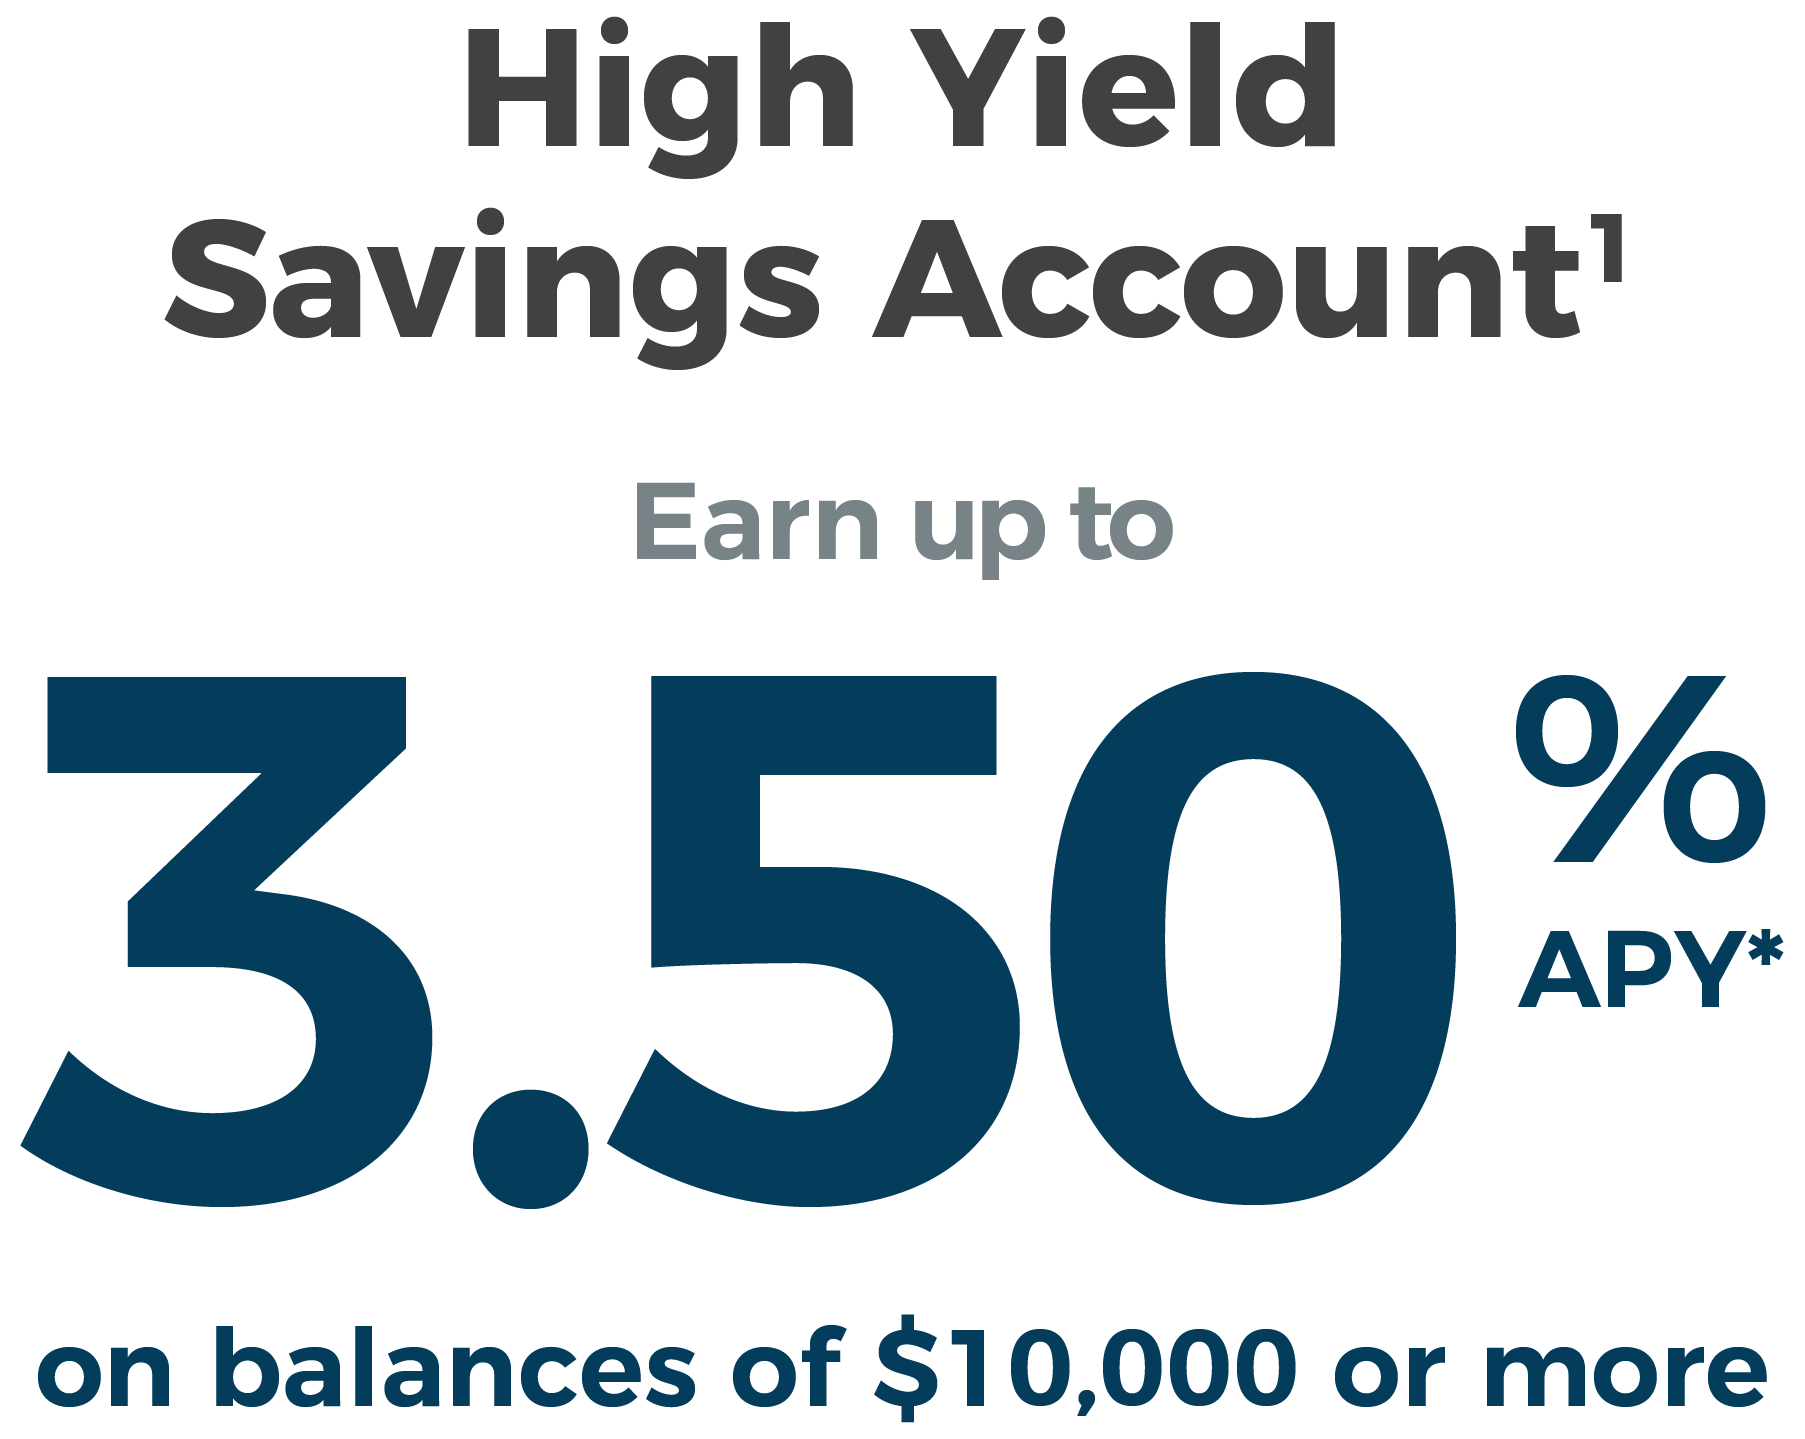 Special High Yield Savings Account Offer